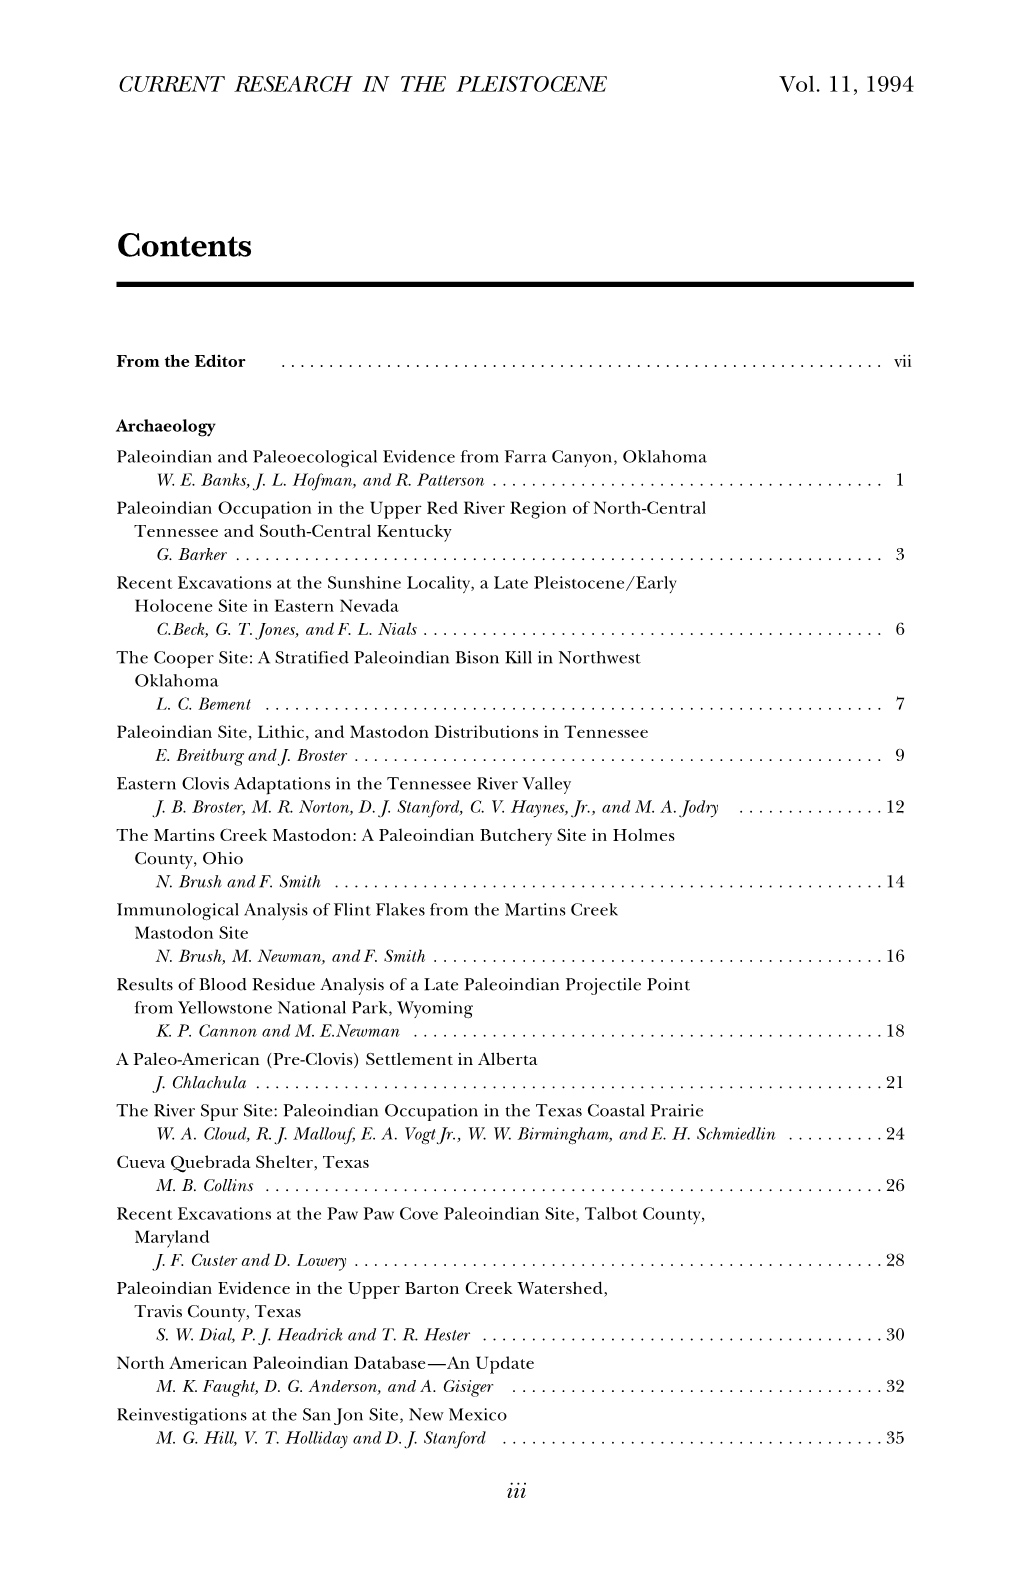 CRP Table of Contents